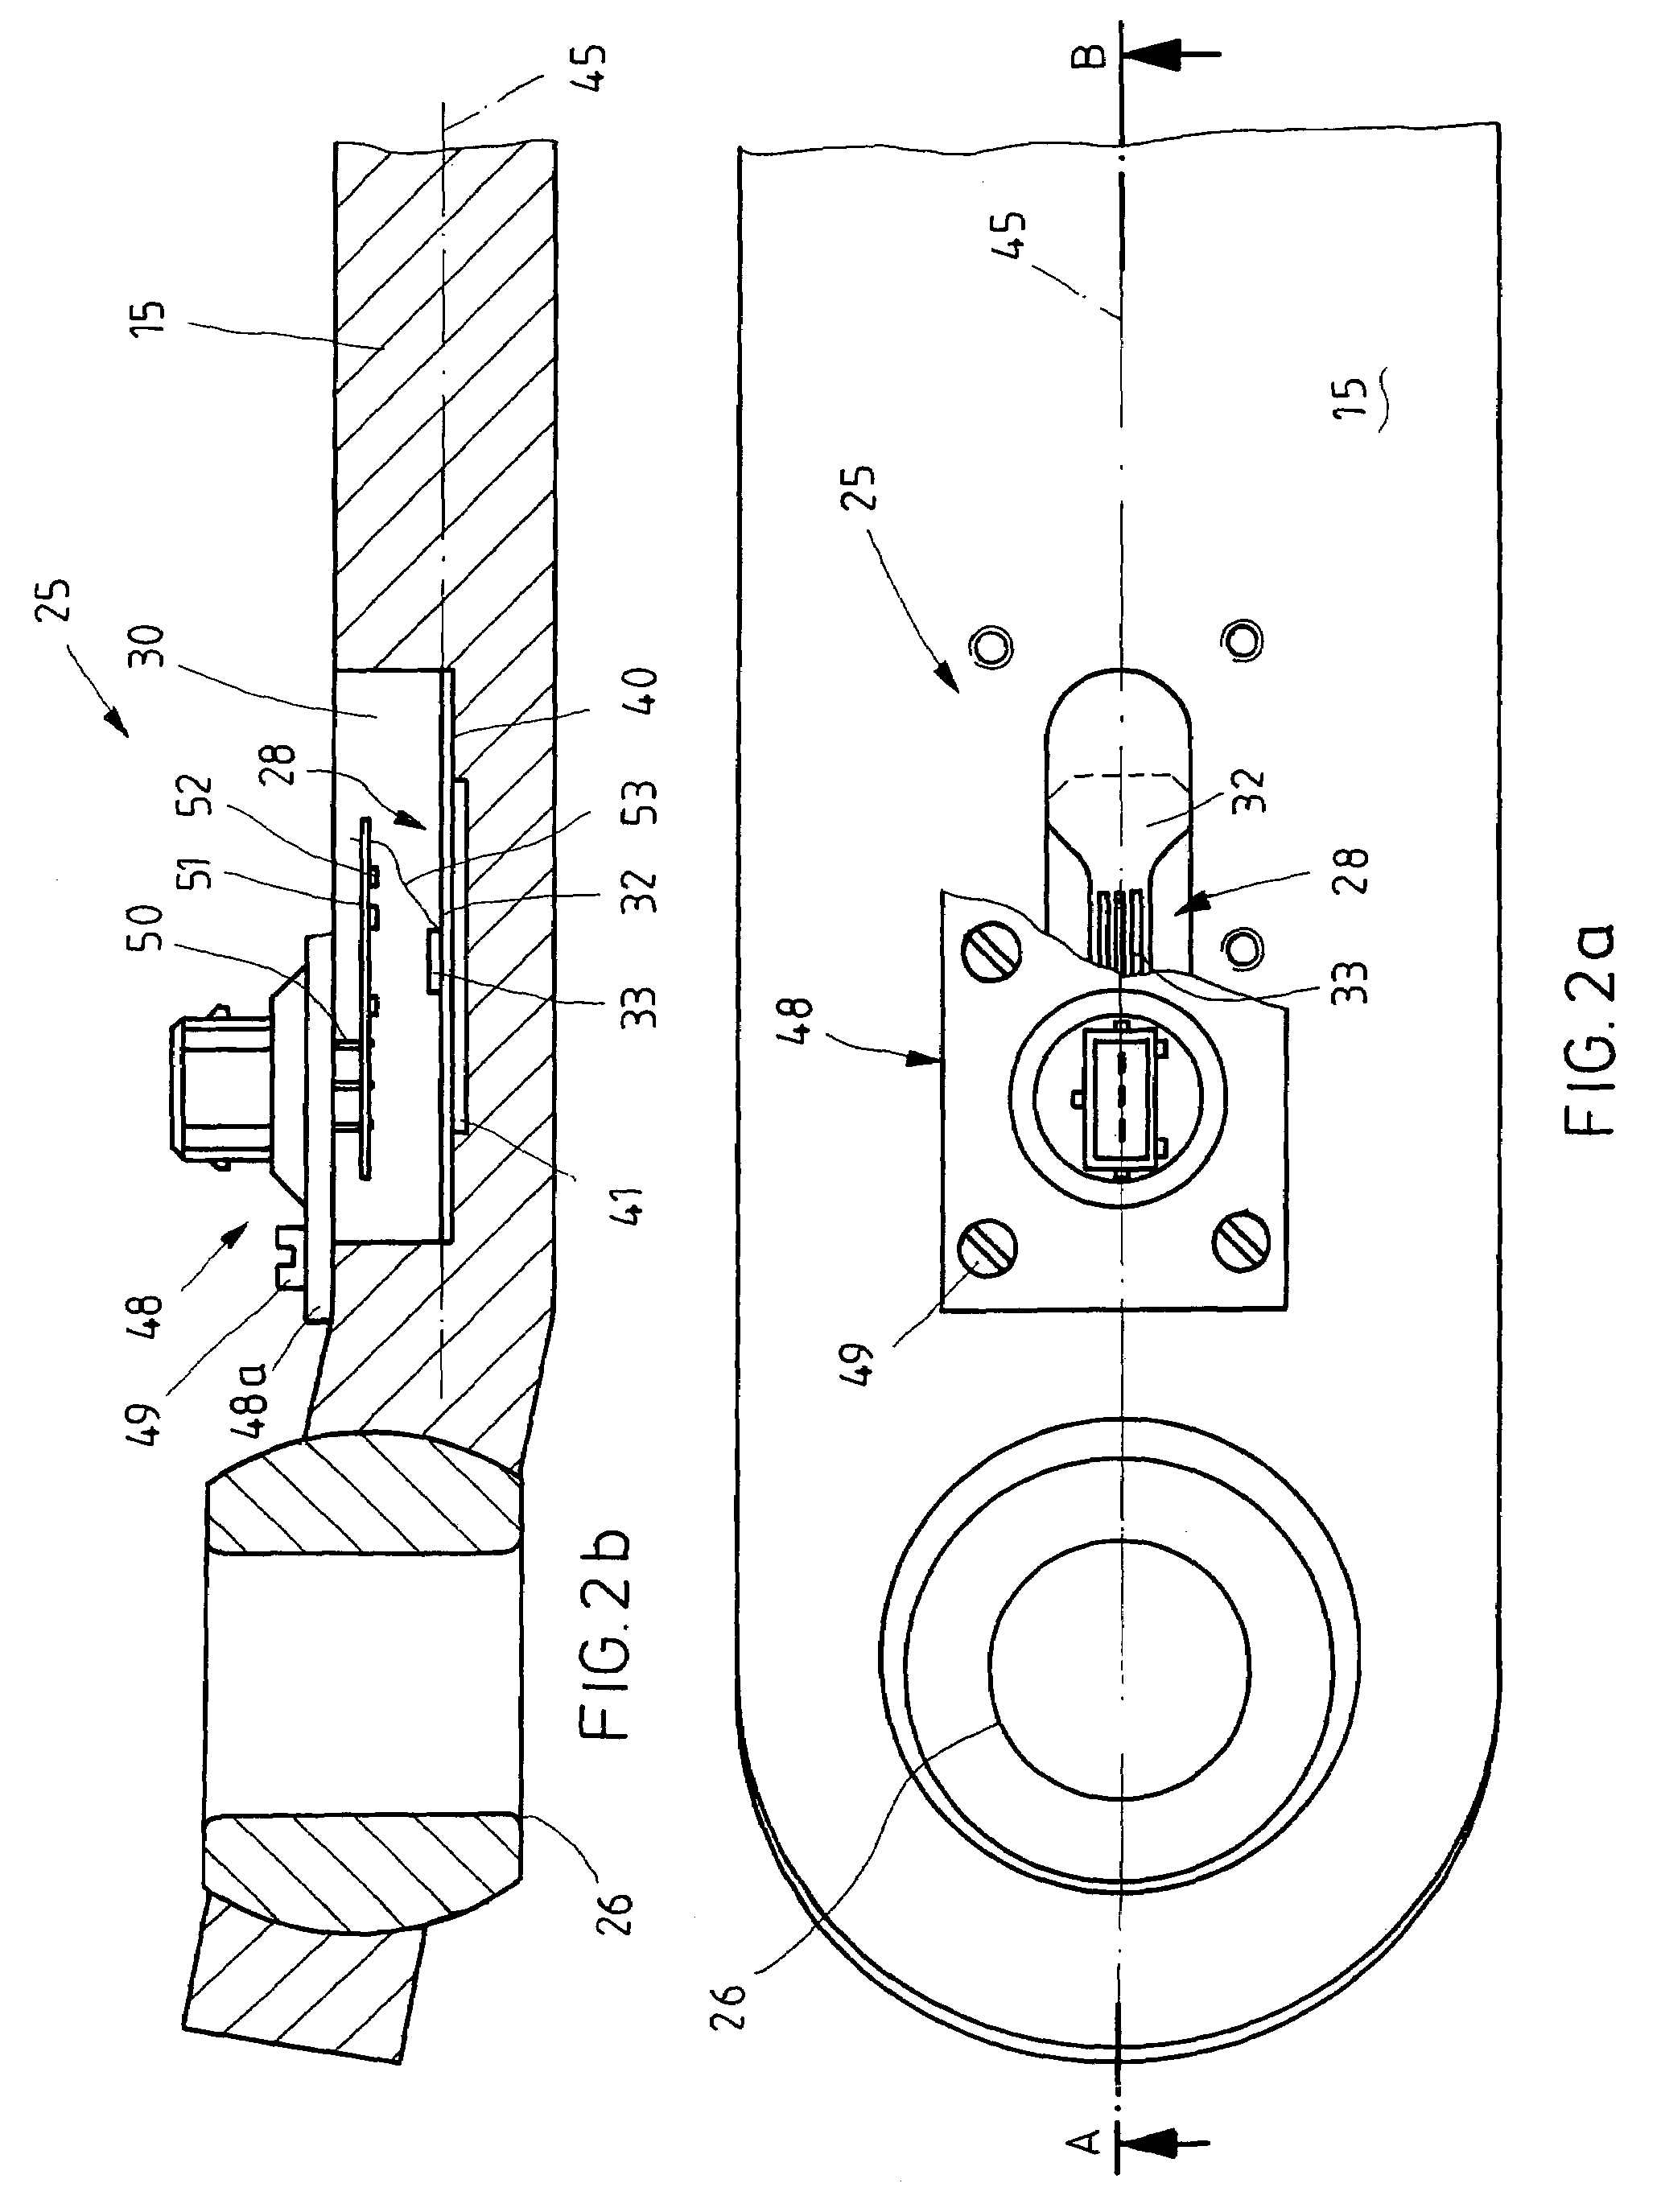 Force measuring apparatus and strain measuring element